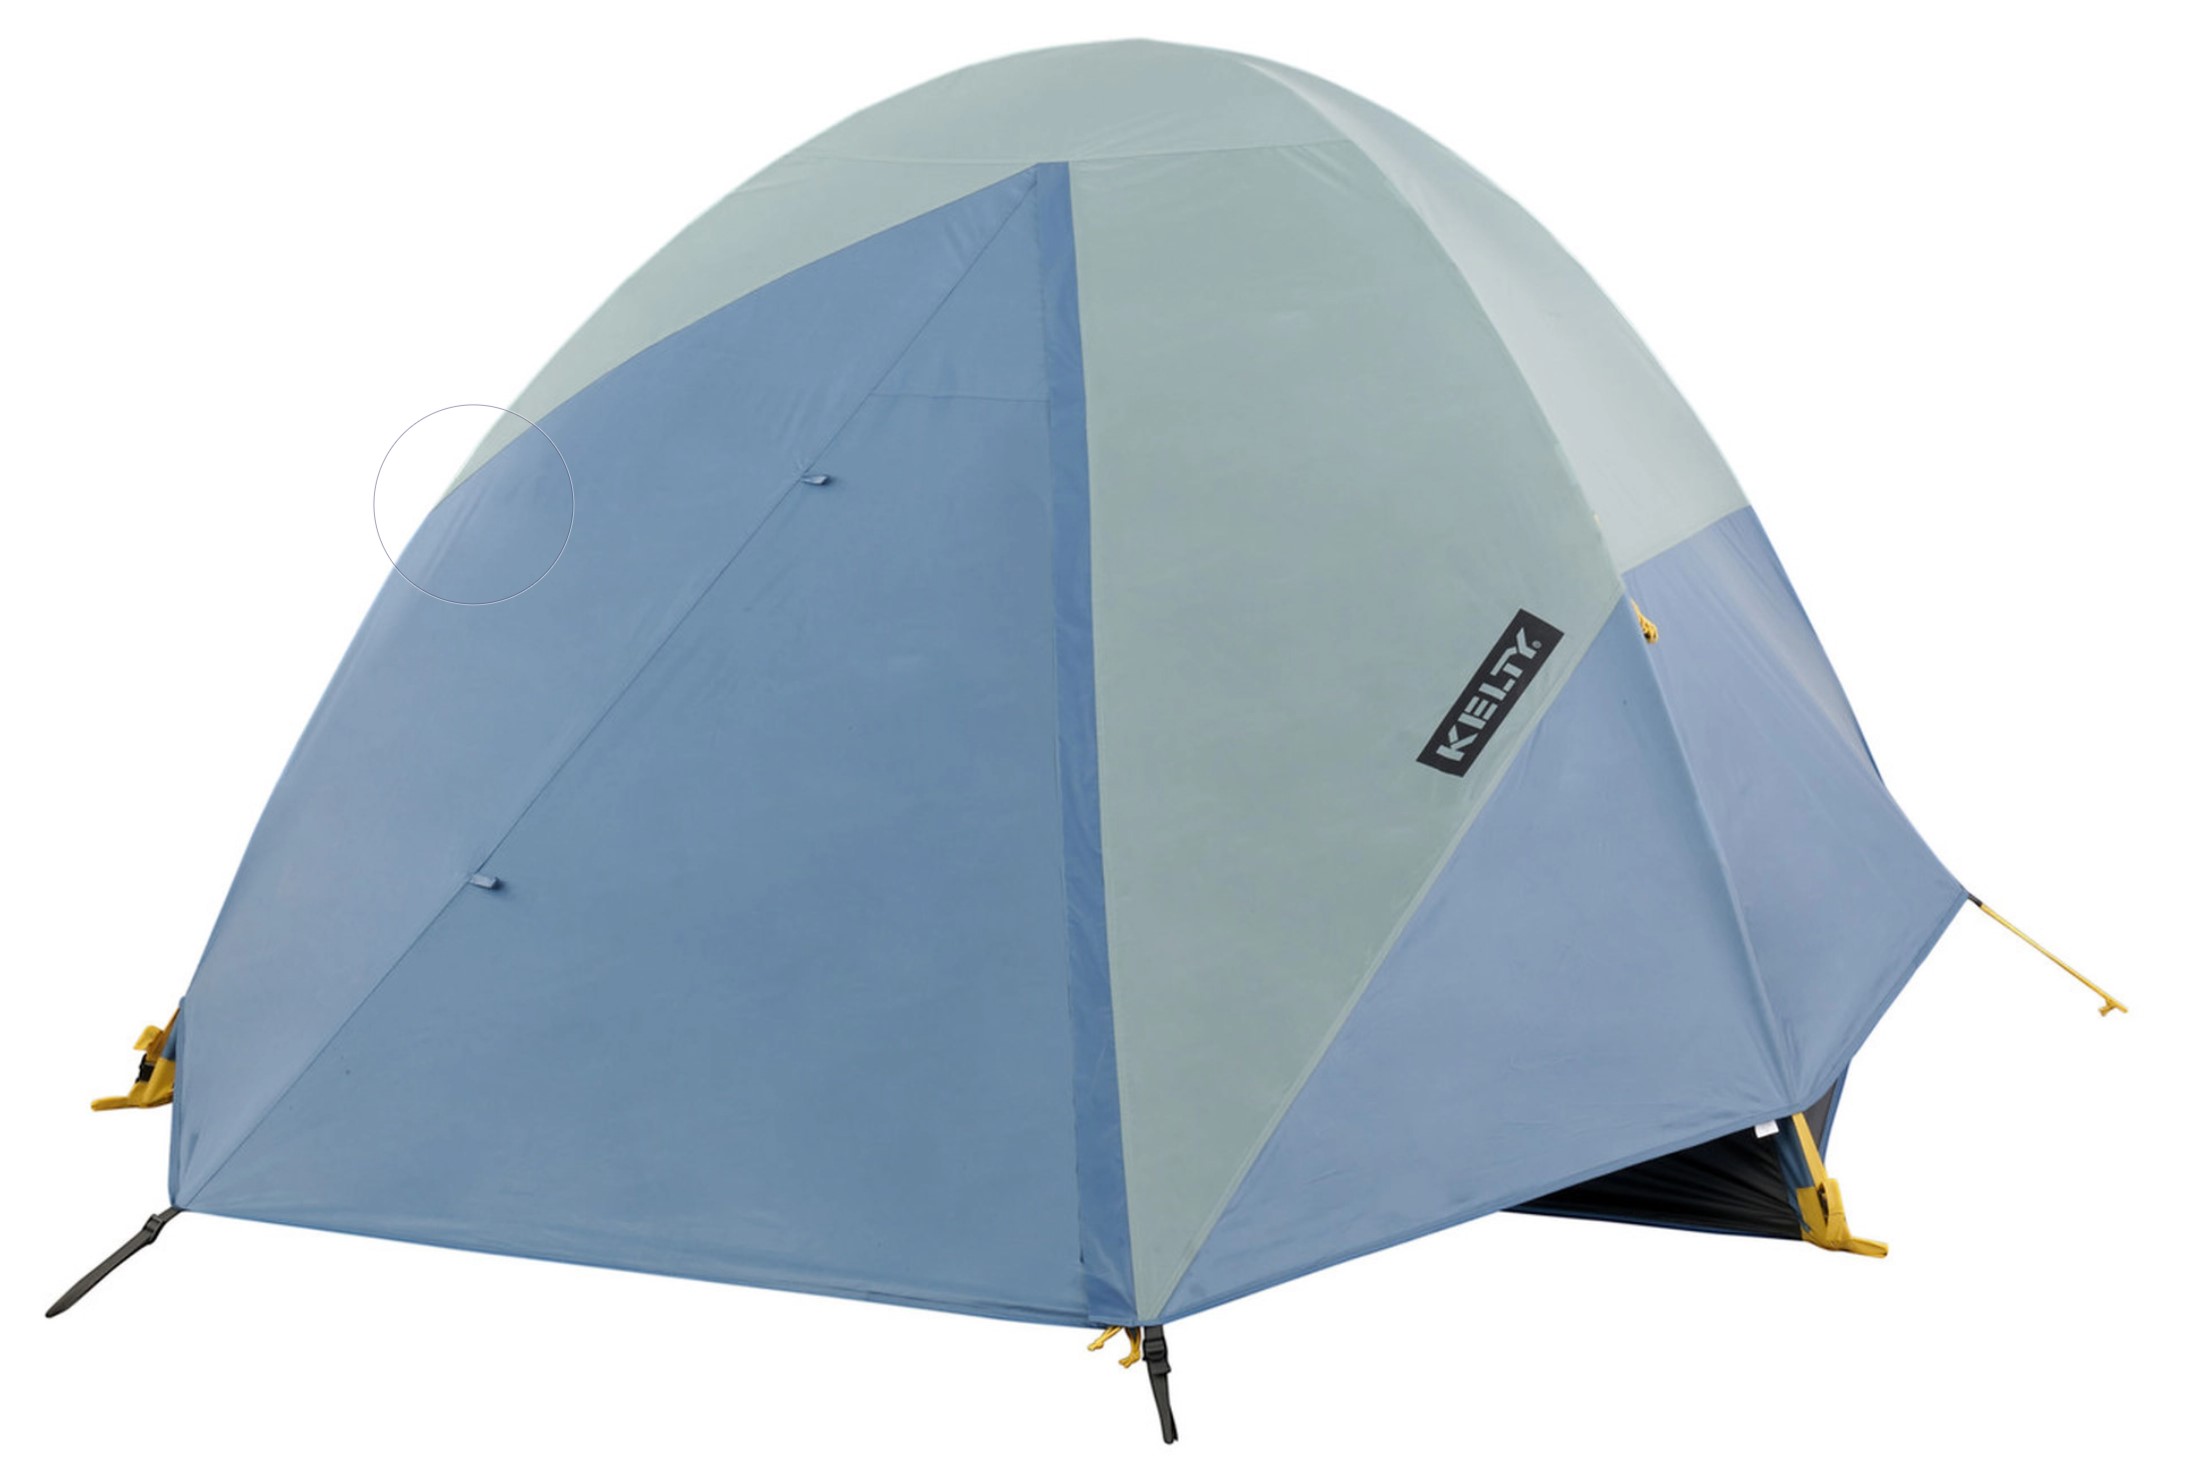 Kelty Discovery Element 4 Tent